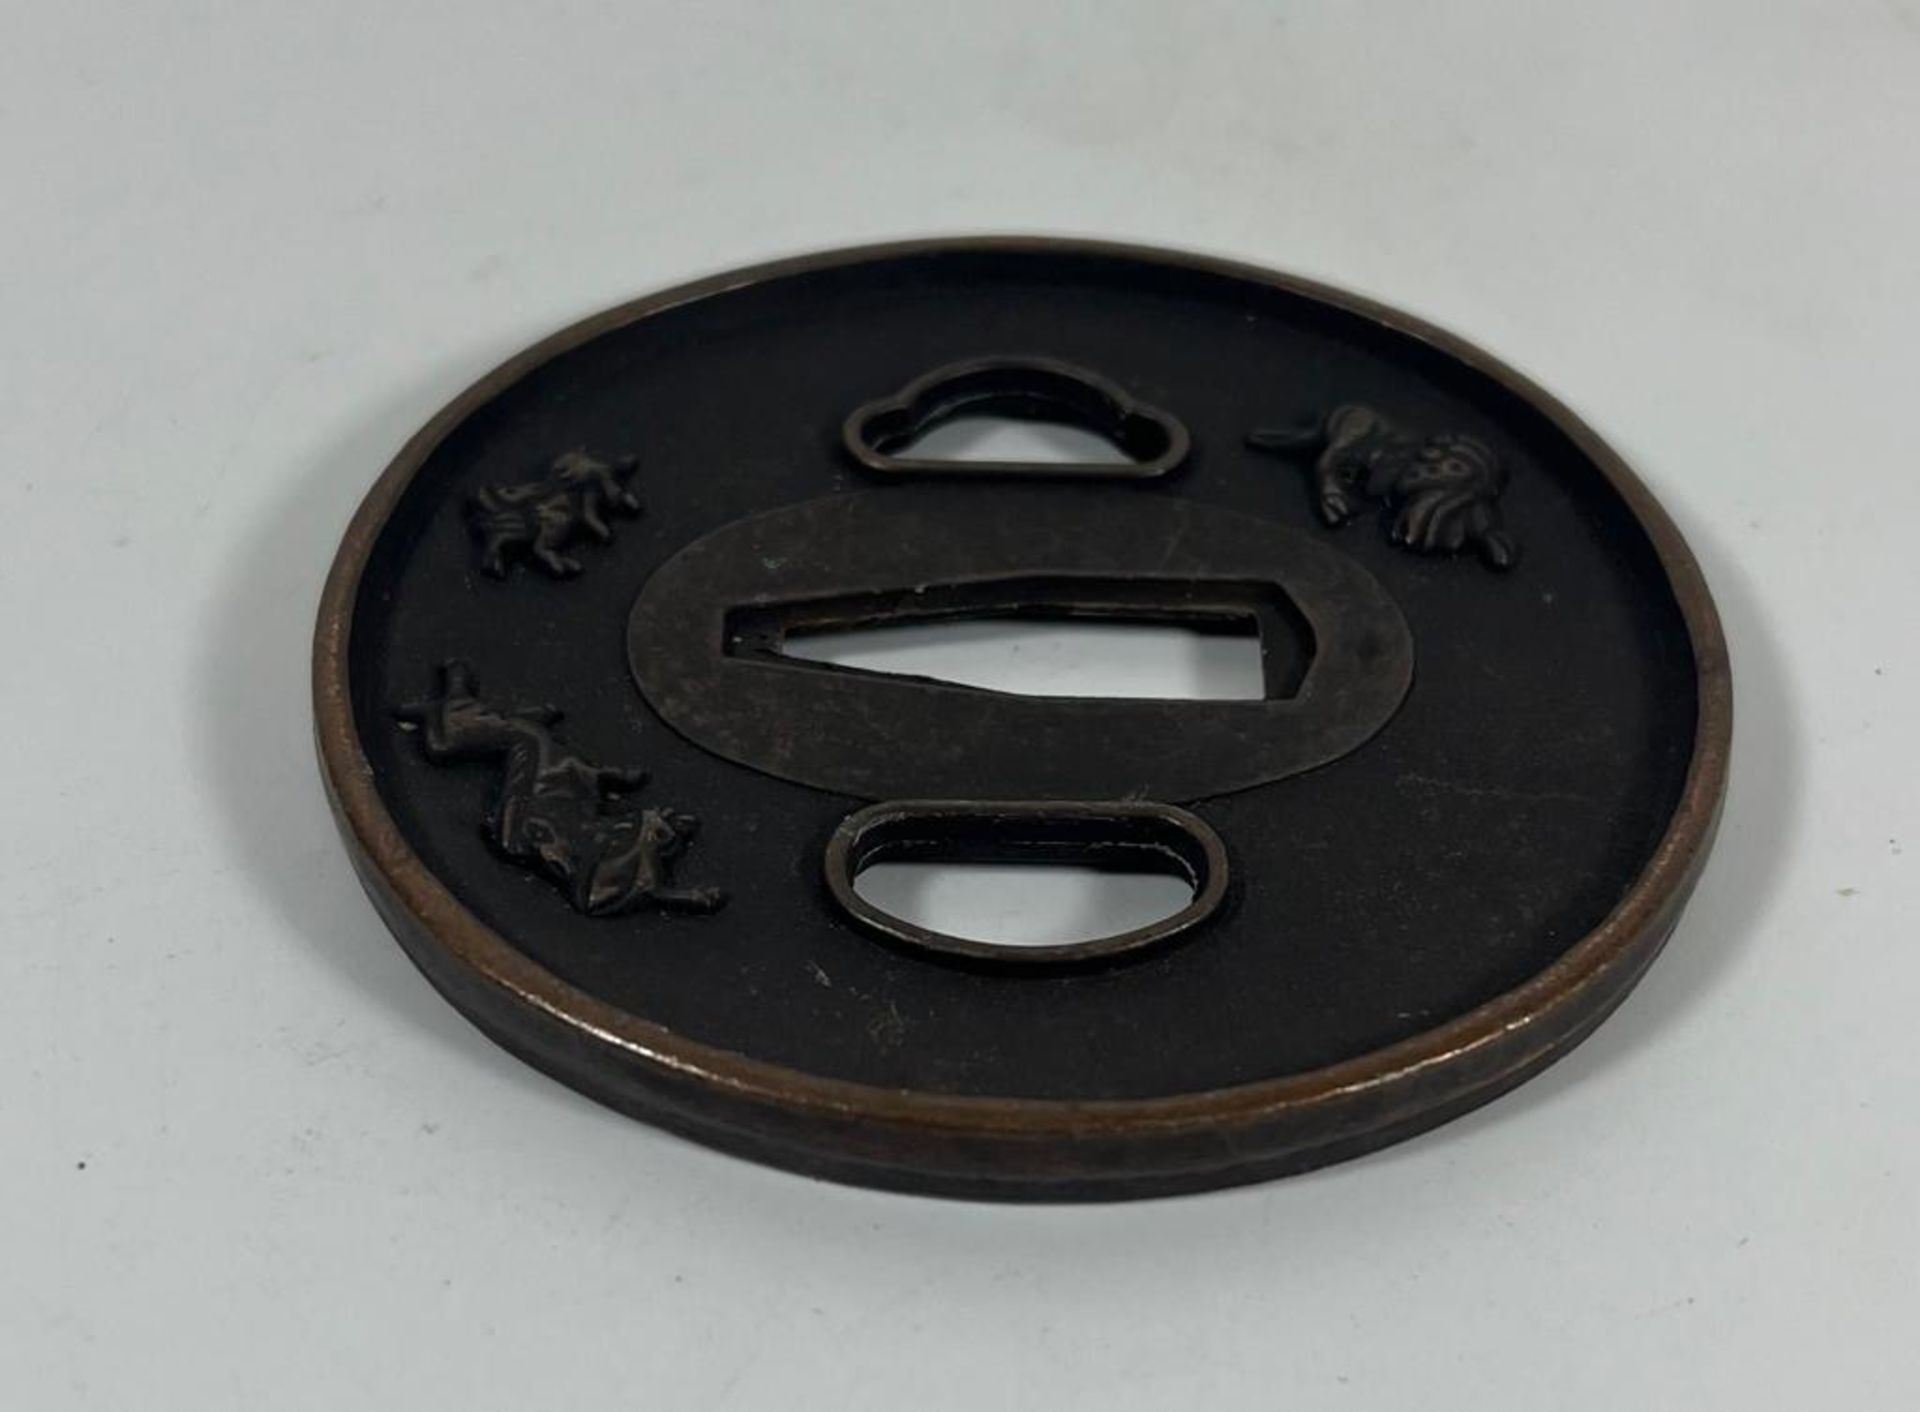 A JAPANESE BRONZE TSUBA WITH MYTHICAL BEAST DESIGN, DIAMETER 7.5 CM - Image 3 of 4